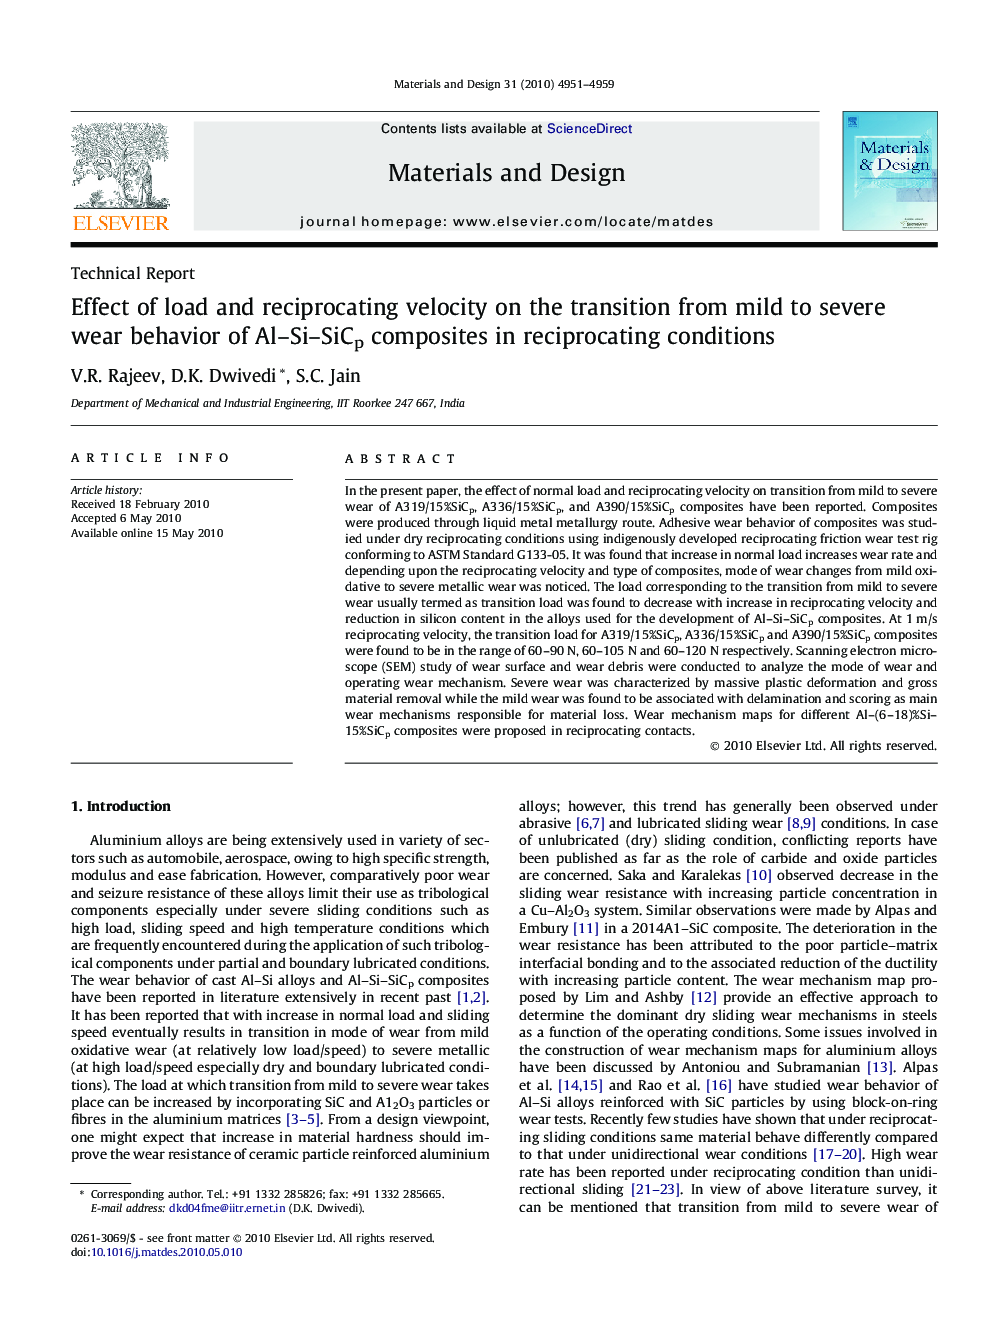 Effect of load and reciprocating velocity on the transition from mild to severe wear behavior of Al–Si–SiCp composites in reciprocating conditions